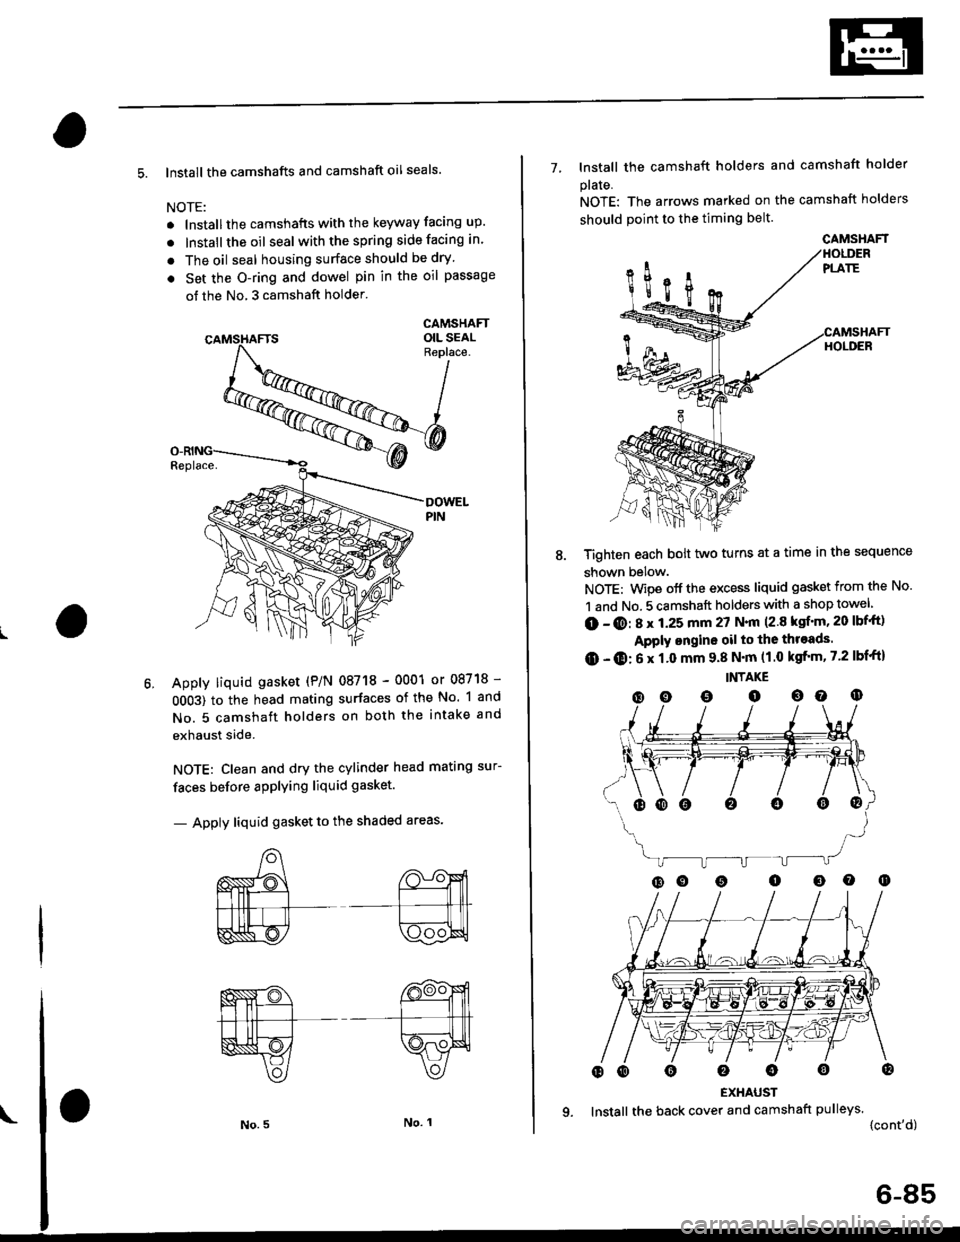 HONDA CIVIC 2000 6.G User Guide 5. lnstall the camshafts and camshaft oil seals.
NOTE:
. lnstallthe camshafts with the keyway facing up.
. lnstall the oil seal withthespring side facing in.
. The oil seal housing surface should be d